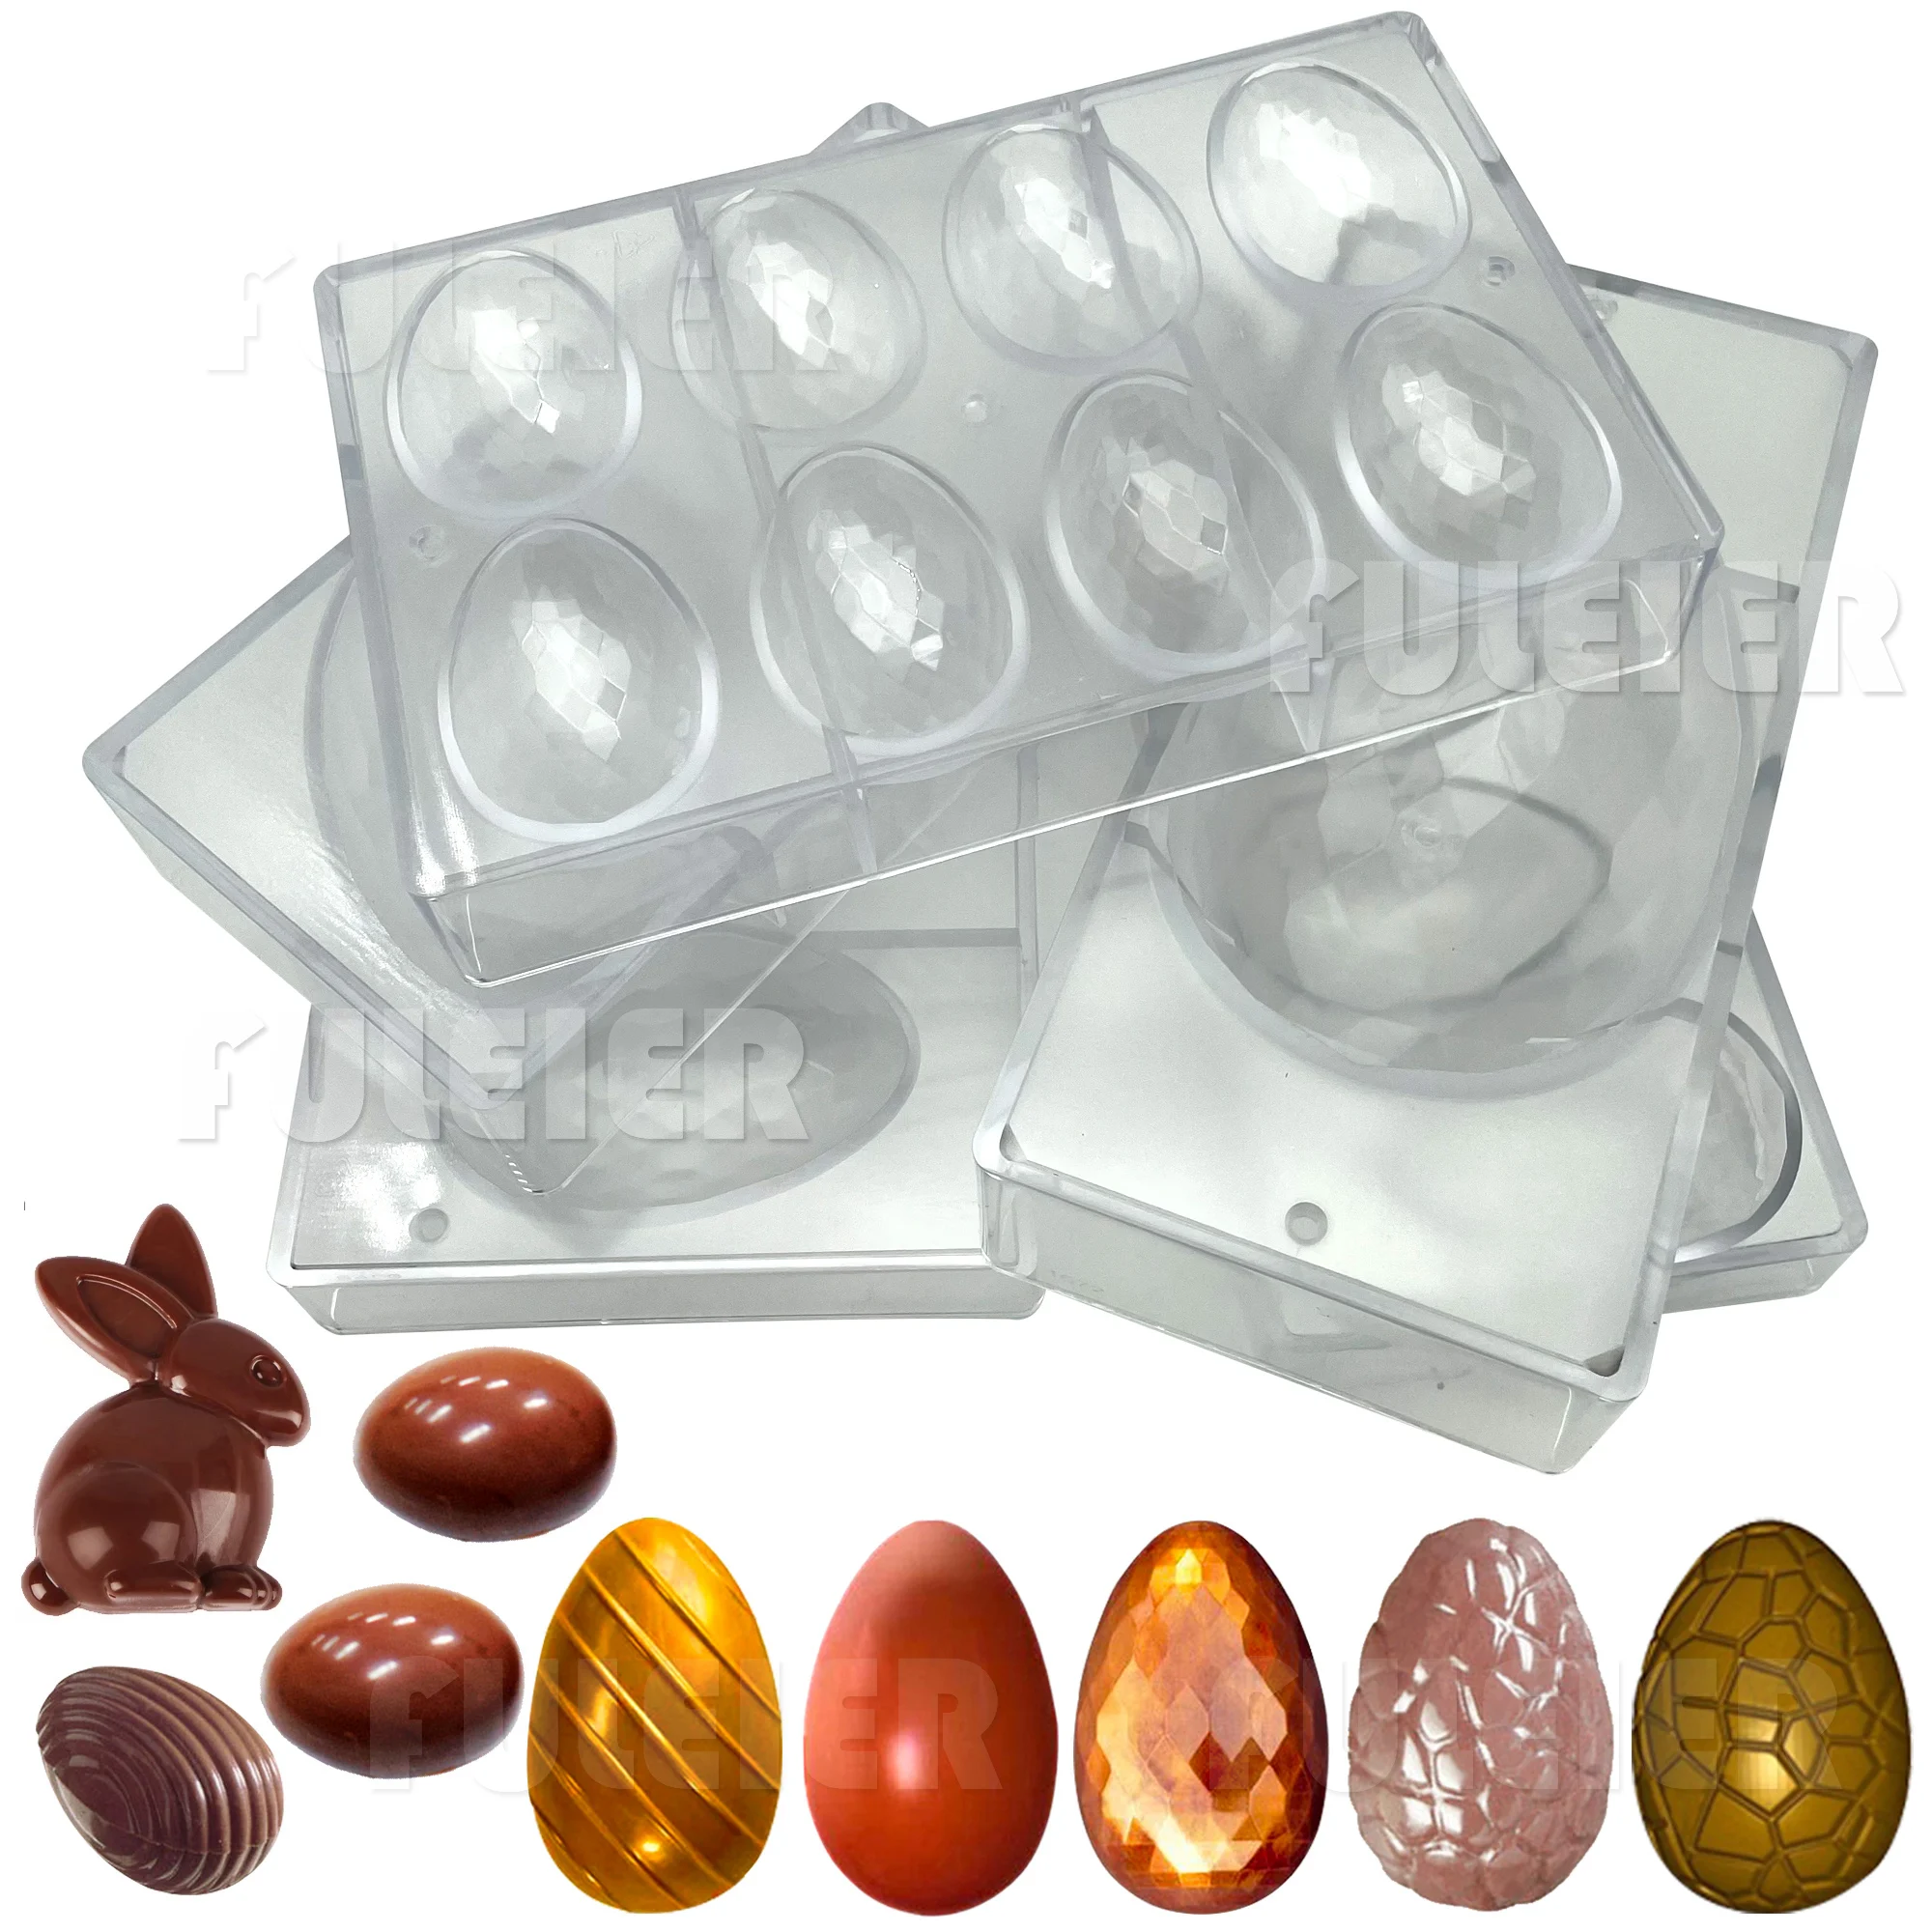 DIY Rabbit Easter Egg Chocolate Mold Polycarbonate Chocolate Mold Confectionery Tools Cake Decoration Baking Pastry Candy Mould